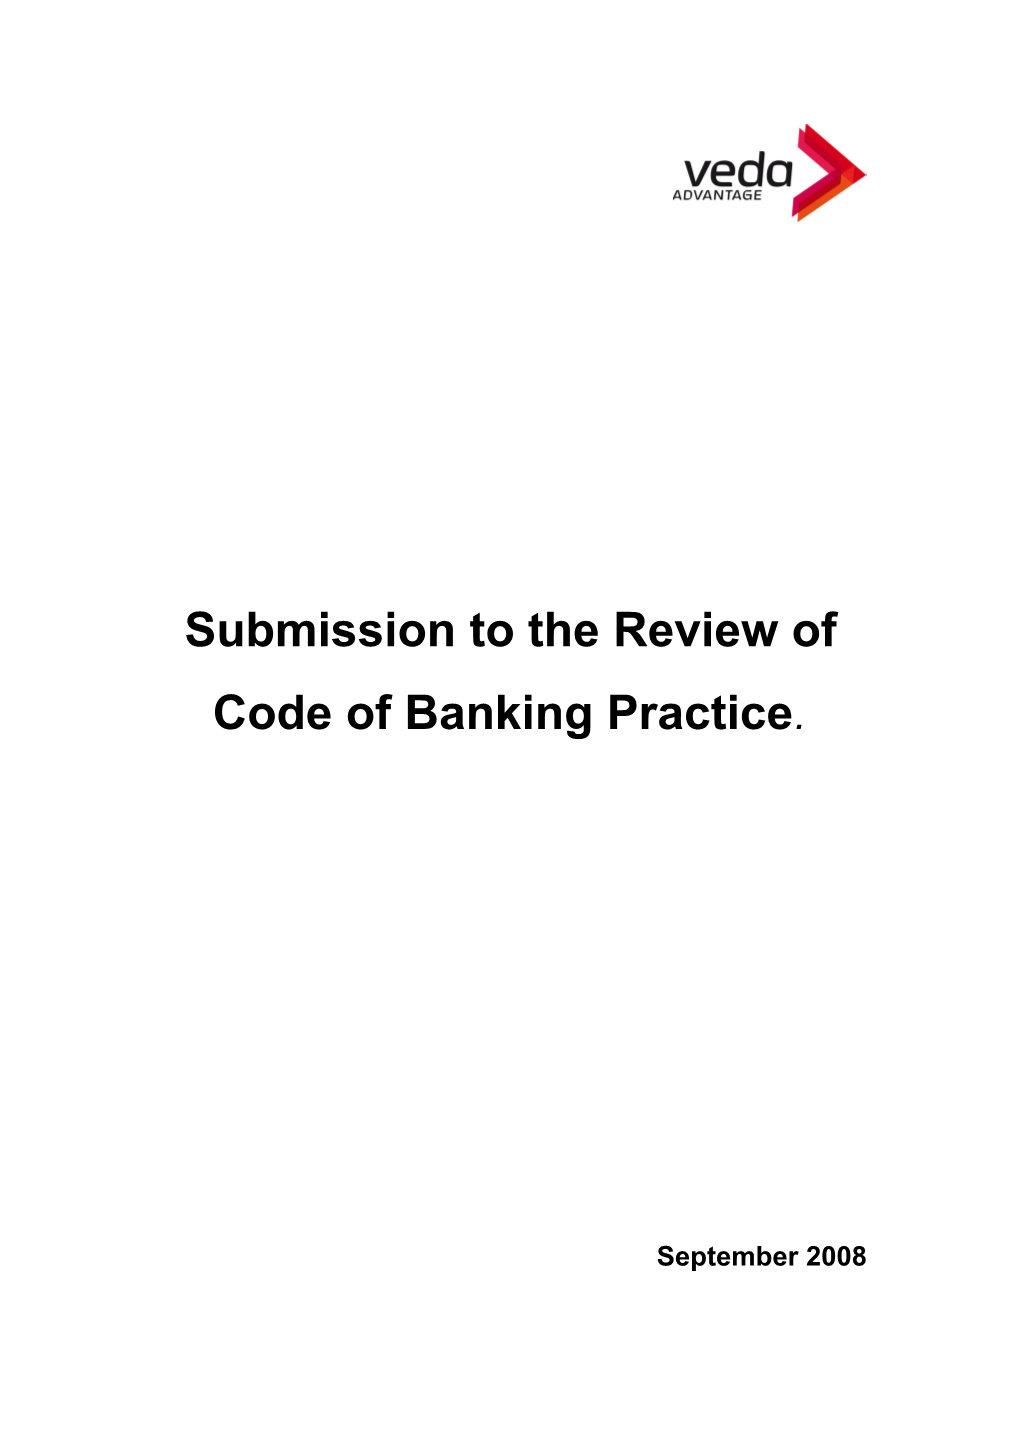 Review of Code of Banking Practice